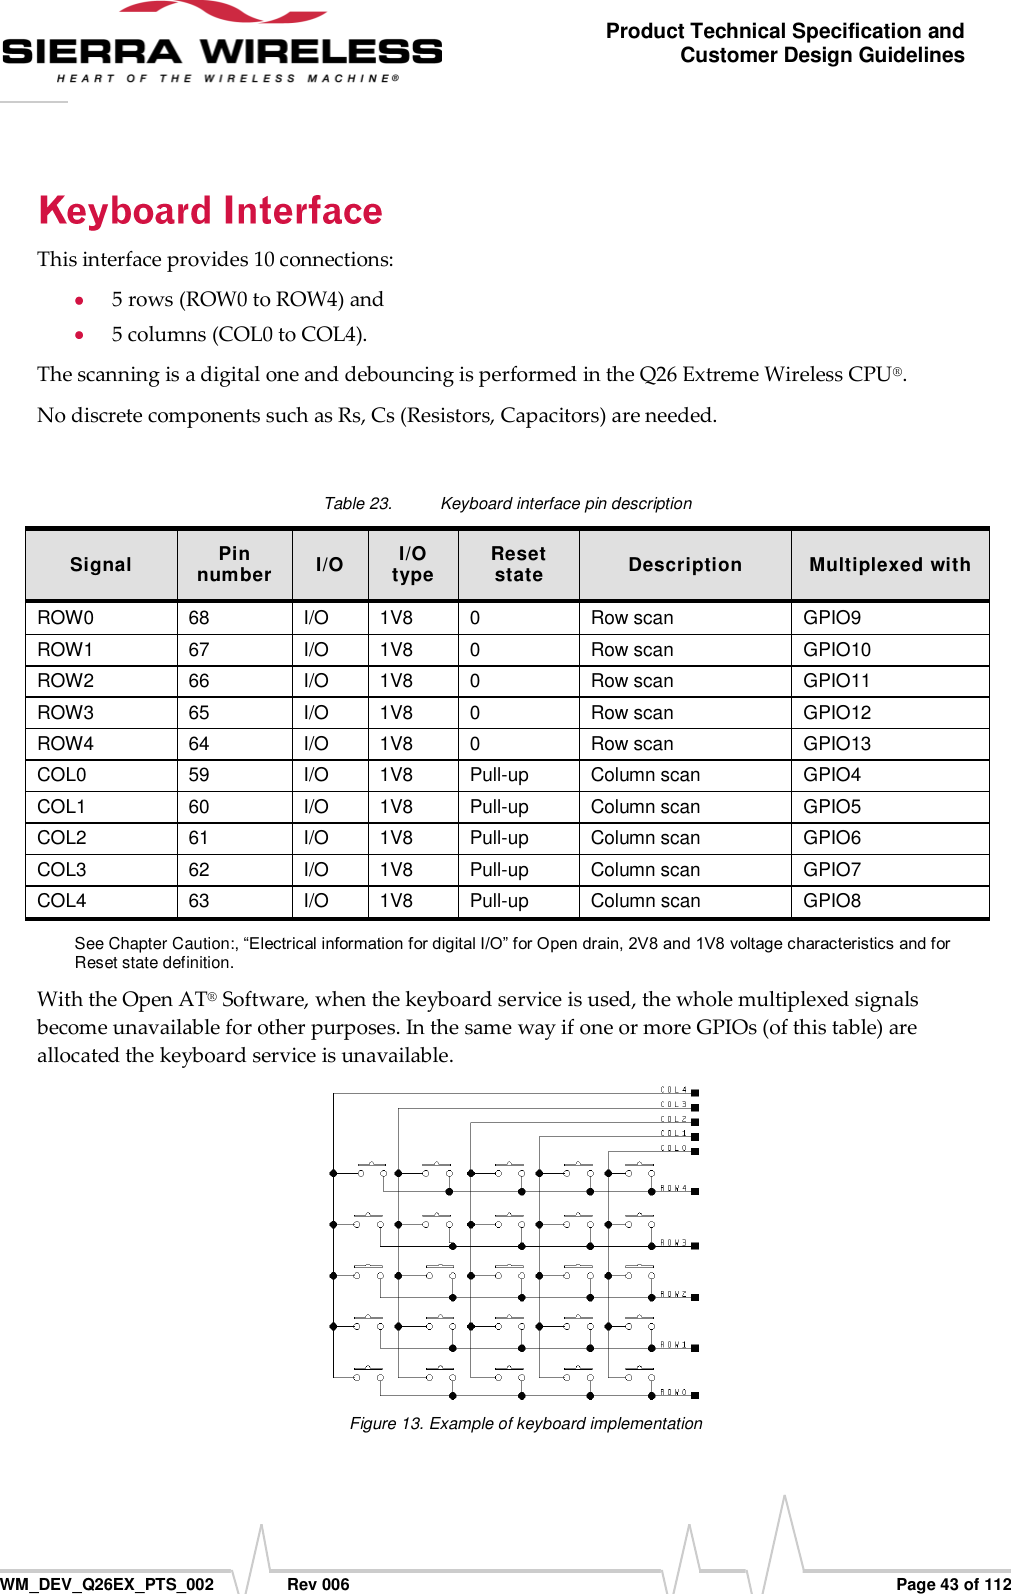      WM_DEV_Q26EX_PTS_002  Rev 006  Page 43 of 112 Product Technical Specification and Customer Design Guidelines This interface provides 10 connections:  5 rows (ROW0 to ROW4) and   5 columns (COL0 to COL4). The scanning is a digital one and debouncing is performed in the Q26 Extreme Wireless CPU®.  No discrete components such as Rs, Cs (Resistors, Capacitors) are needed.  Table 23.  Keyboard interface pin description  Signal Pin number I/O I/O type Reset state Description Multiplexed with ROW0 68 I/O 1V8 0 Row scan GPIO9 ROW1 67 I/O 1V8 0 Row scan GPIO10 ROW2 66 I/O 1V8 0 Row scan GPIO11 ROW3 65 I/O 1V8 0 Row scan GPIO12 ROW4 64 I/O 1V8 0 Row scan GPIO13 COL0 59 I/O 1V8 Pull-up Column scan GPIO4 COL1 60 I/O 1V8 Pull-up Column scan GPIO5 COL2 61 I/O 1V8 Pull-up Column scan GPIO6 COL3 62 I/O 1V8 Pull-up Column scan GPIO7 COL4 63 I/O 1V8 Pull-up Column scan GPIO8 See Chapter Caution:, “Electrical information for digital I/O” for Open drain, 2V8 and 1V8 voltage characteristics and for Reset state definition. With the Open AT® Software, when the keyboard service is used, the whole multiplexed signals become unavailable for other purposes. In the same way if one or more GPIOs (of this table) are allocated the keyboard service is unavailable.  Figure 13. Example of keyboard implementation 